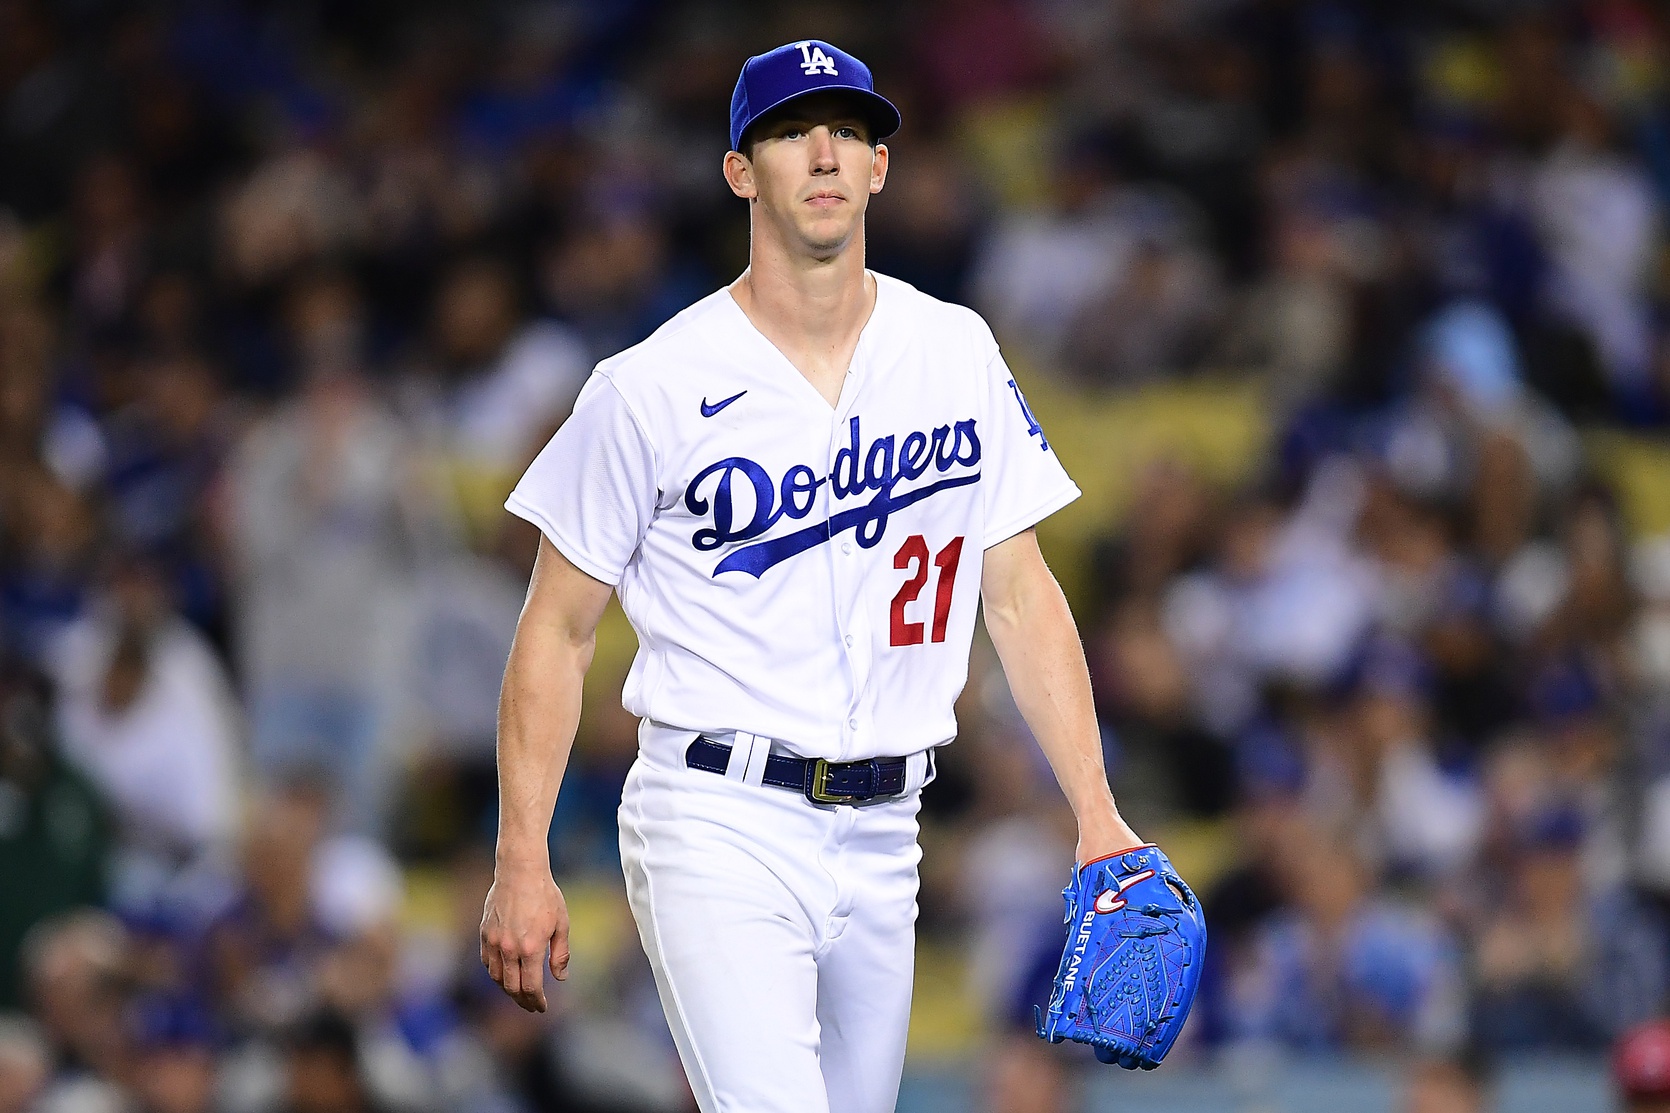 Dodgers News: Walker Buehler Could Return as Starting Pitcher This Season,  Says Dave Roberts